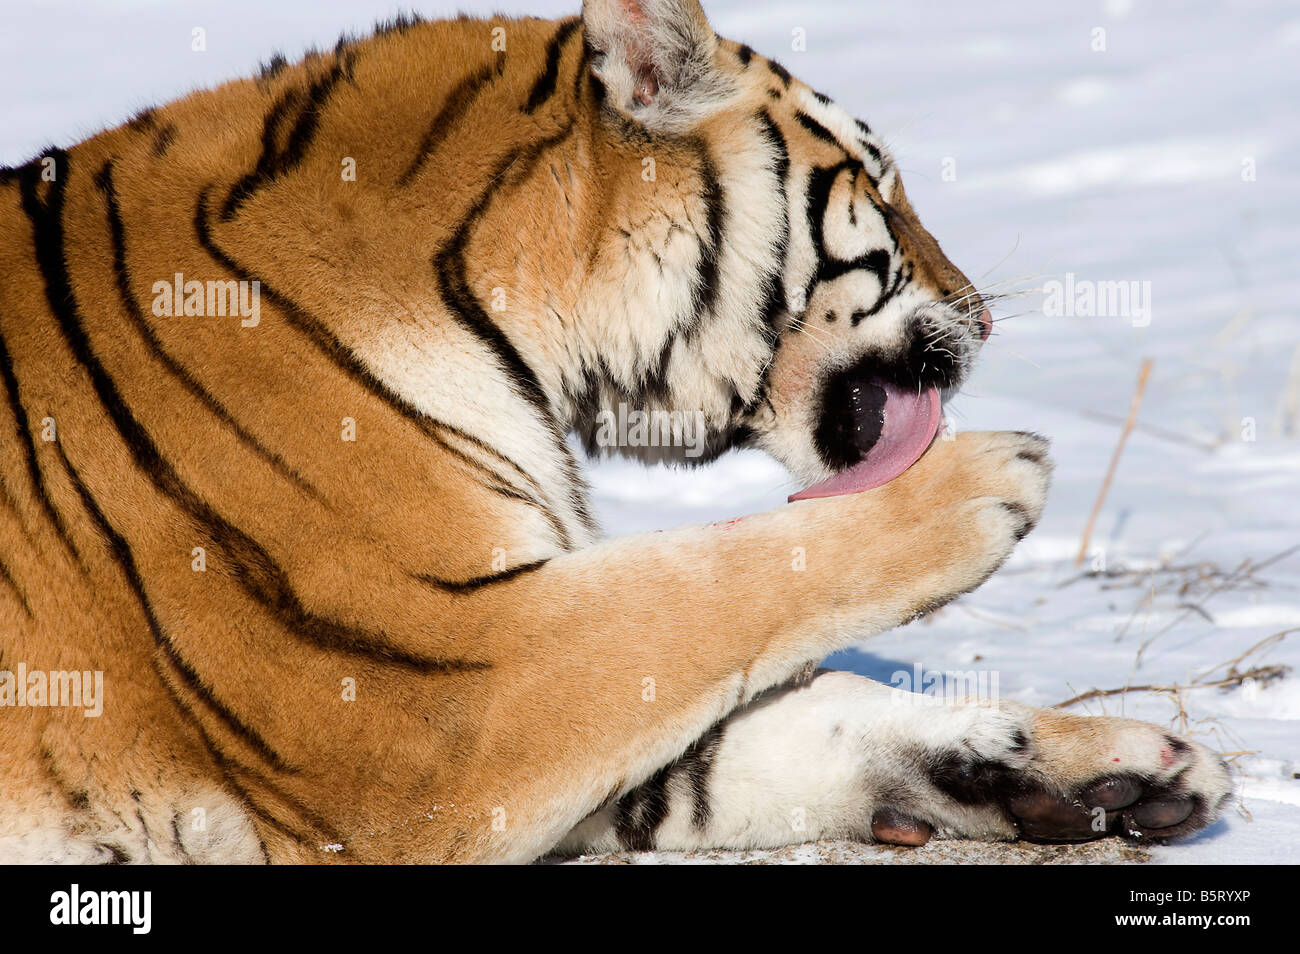 Amur or Siberian tiger Amur or Siberian tiger Panthera tigris altaica grooming by licking fur on paw in Heilongjiang China Stock Photo